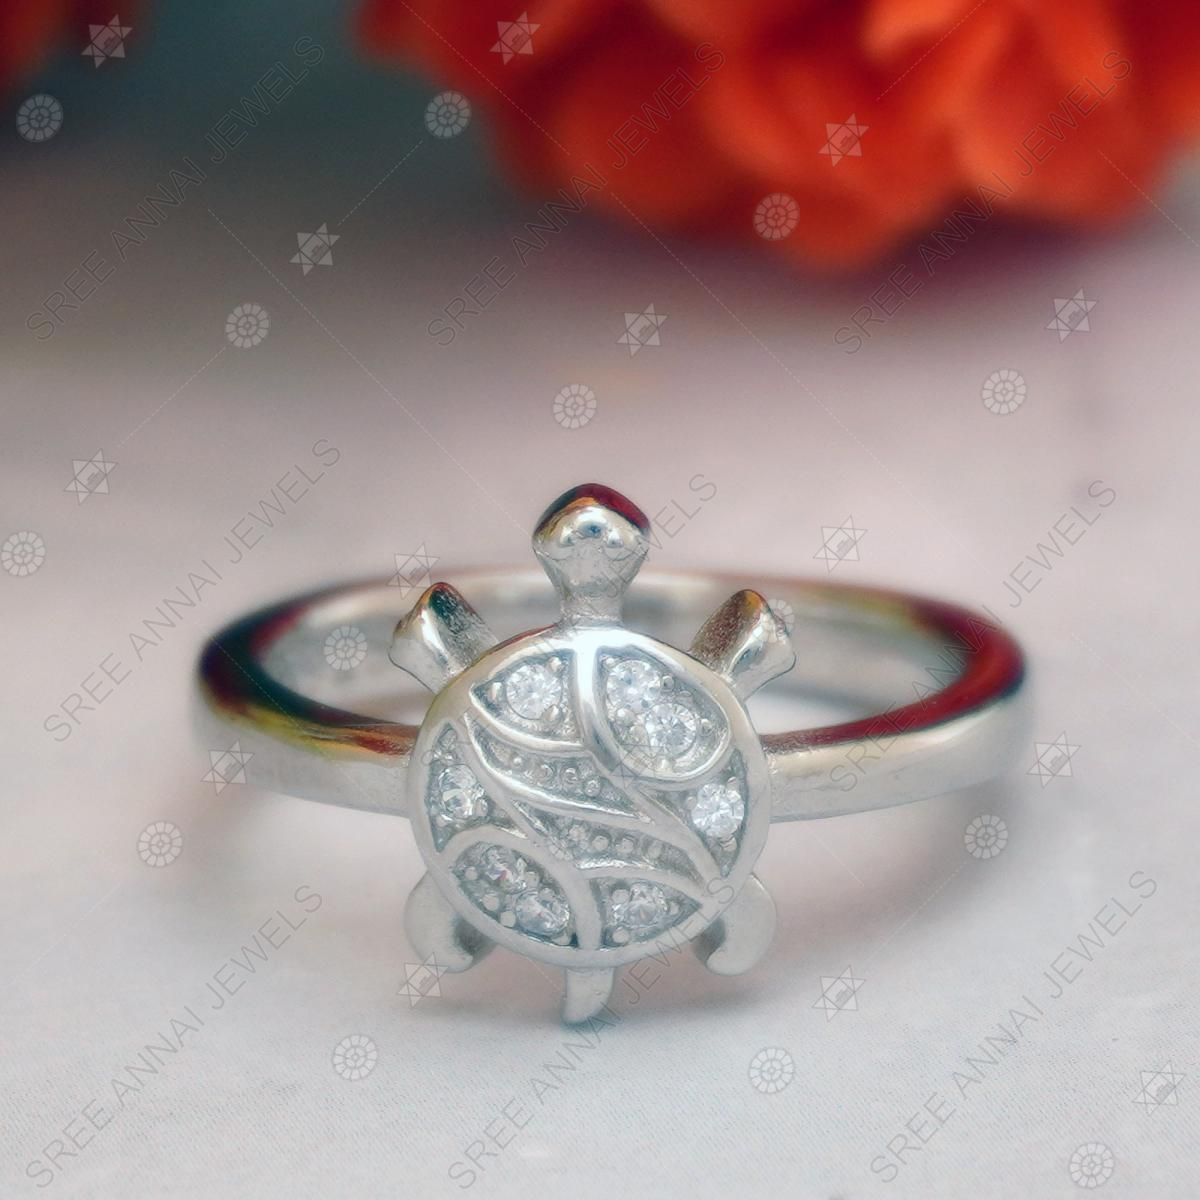 Buy Yellow Chimes Sterling Silver Tortoise Luck Charm Finger Ring online